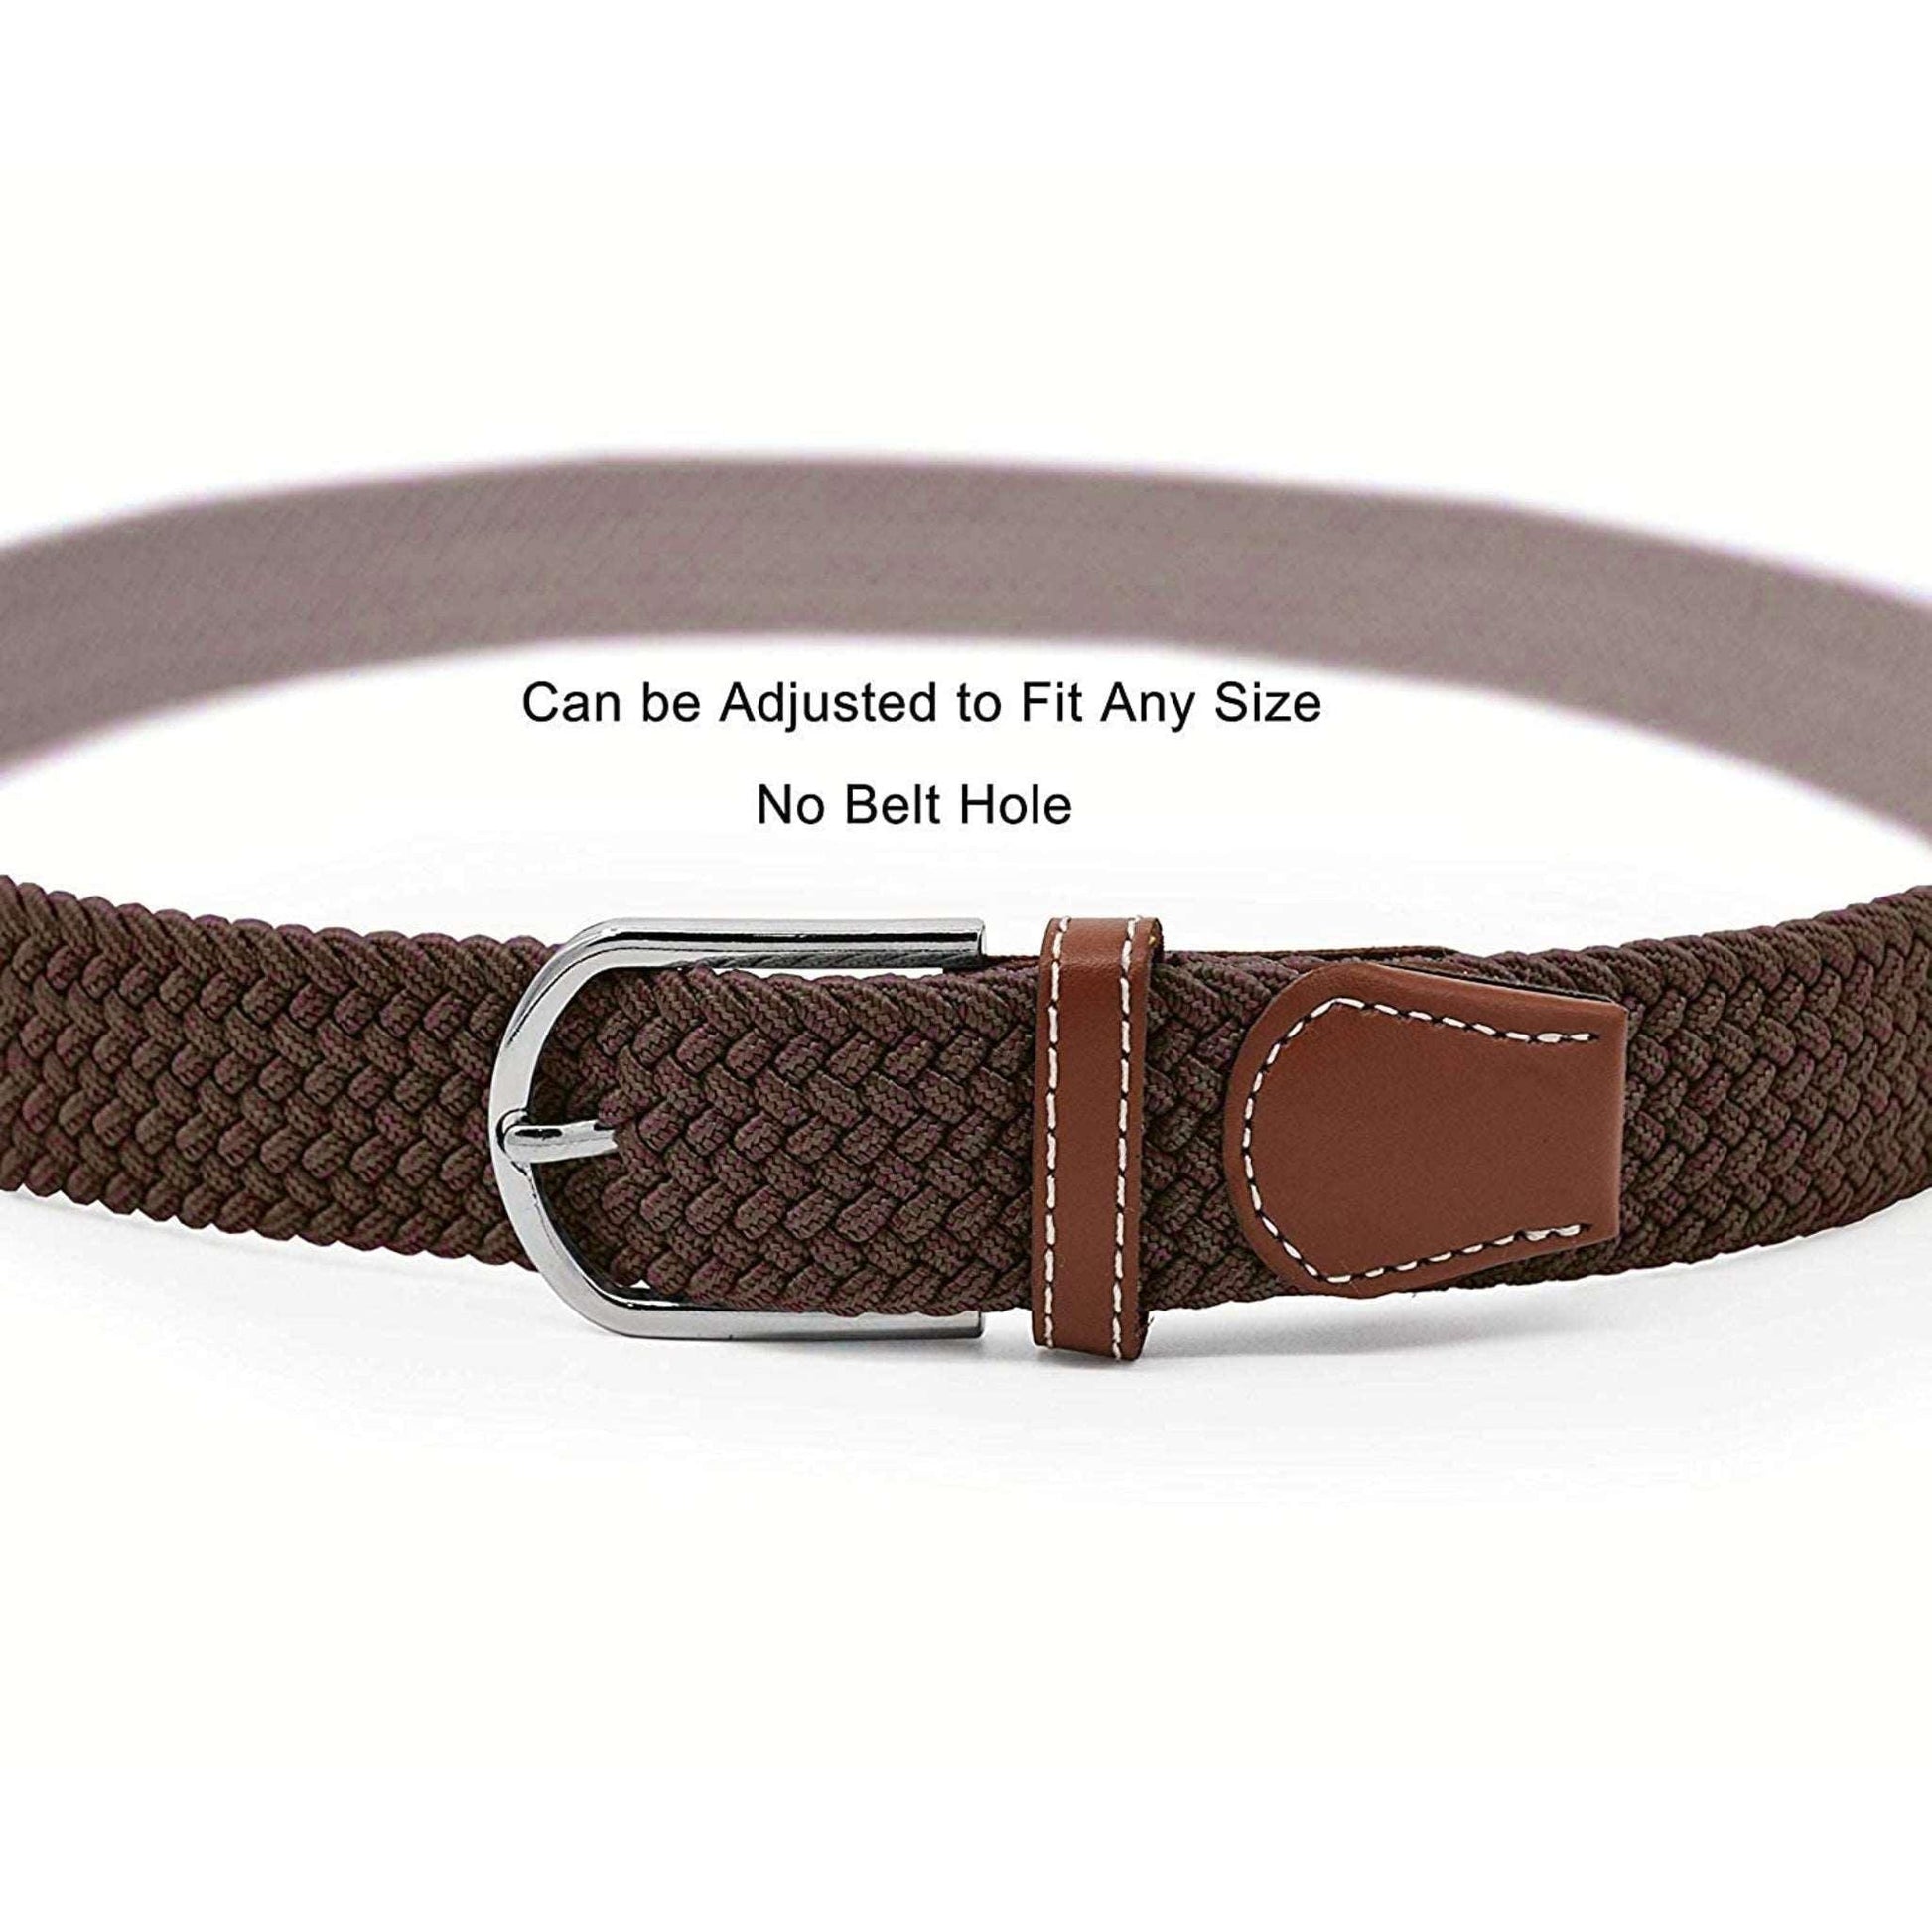 YOUTH ROBE Women's Belt (Brown) - YOUTH ROBE